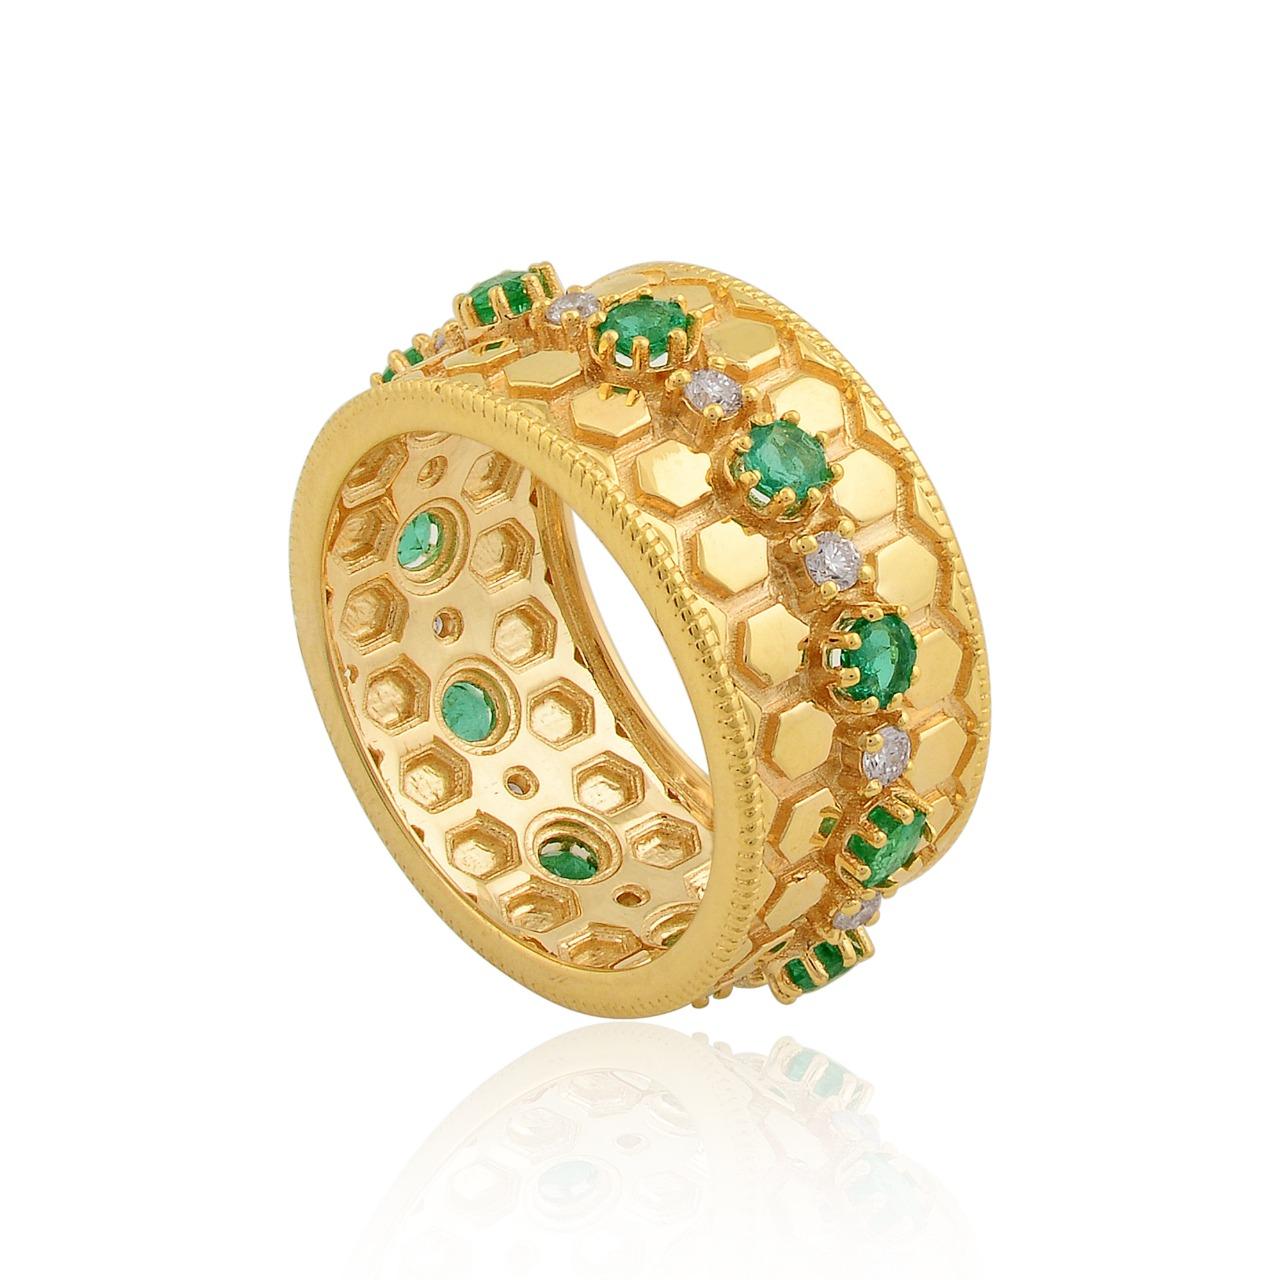 This ring has been meticulously crafted from 14-karat gold.  It is hand set with .78 carats emerald & .25 carats of sparkling diamonds. 

The ring is a size 7 and may be resized to larger or smaller upon request. 
FOLLOW  MEGHNA JEWELS storefront to